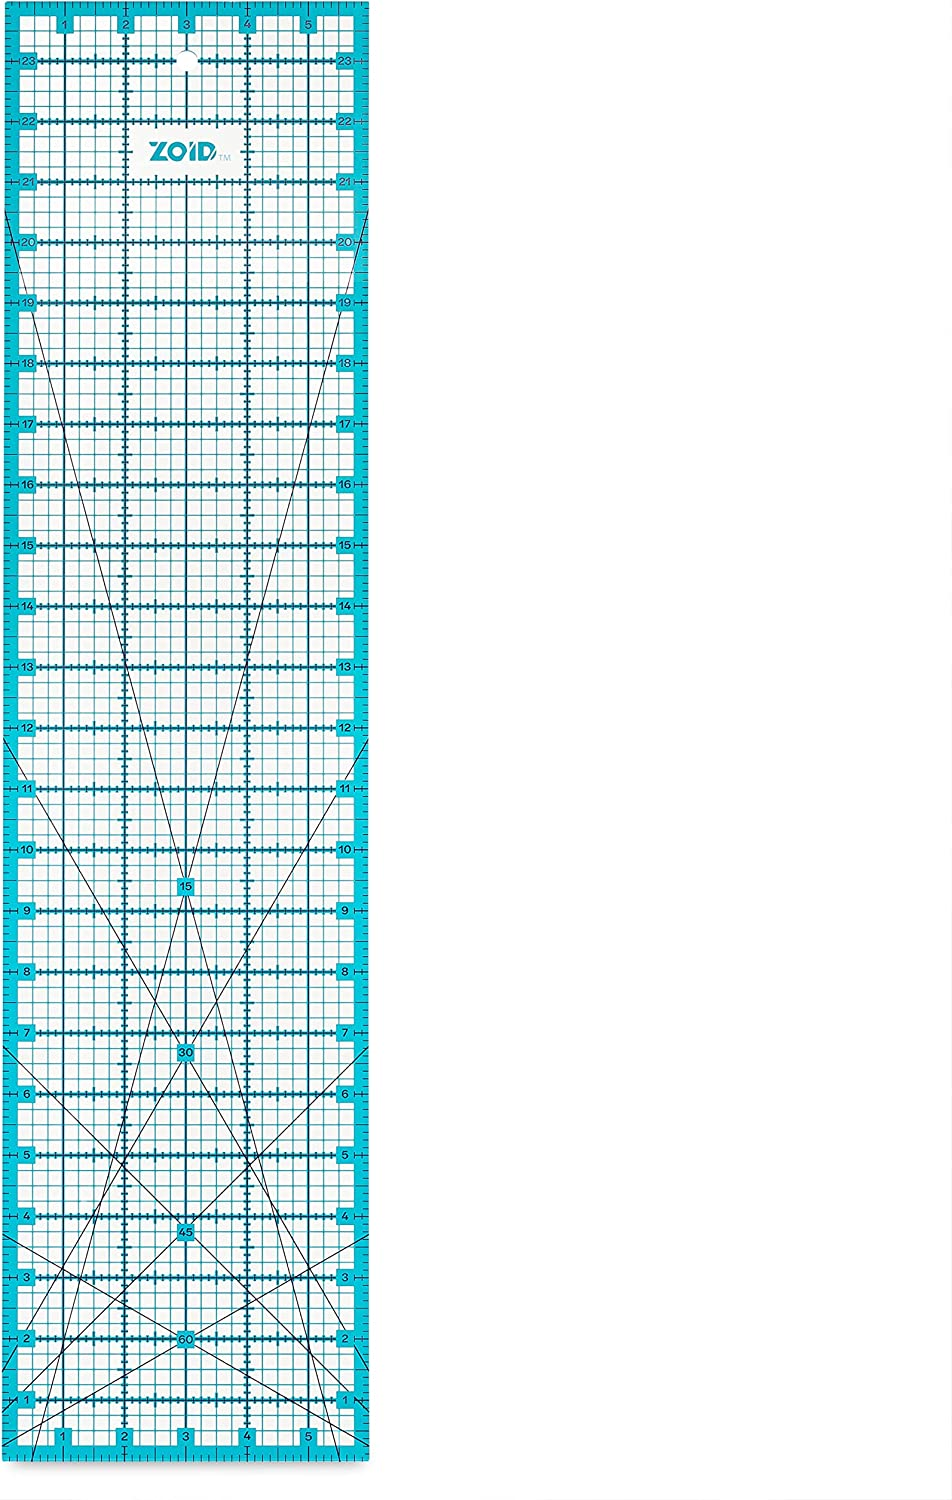 Amazon.com: Zoid 6-1/2" X 24" Acrylic Ruler, 50% off, Reversible Ruler for Measuring, Quilting Ruler, Slip-Resistant Ruler, Clear $7.50